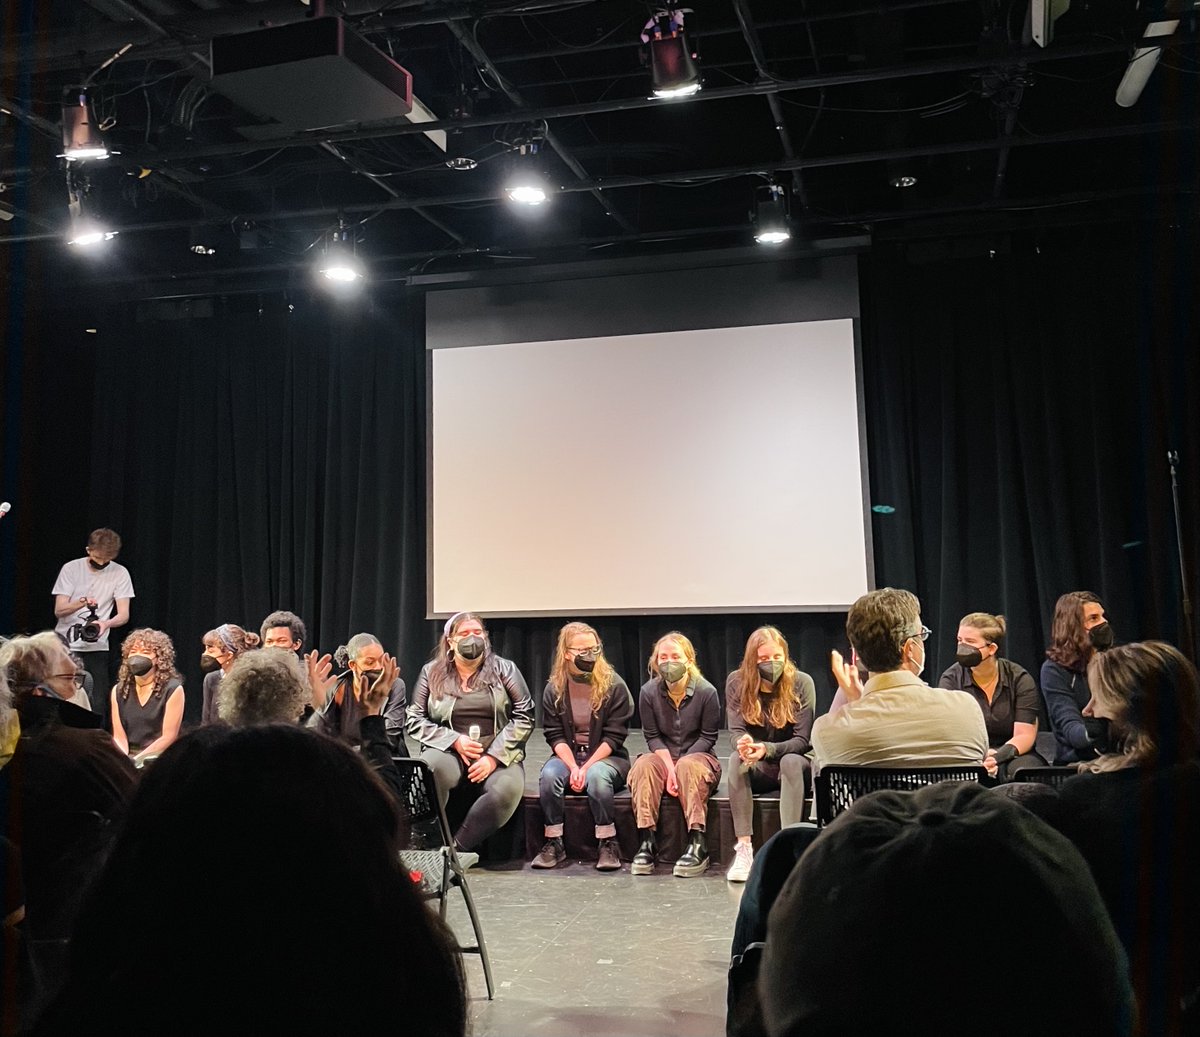 The Transforming Narratives of Gun Violence Spring showcase was a huge success yesterday! Thank you for being a part of our big day. It truly means a lot to us. Visit the TNGV website and learn more: transformnarratives.org @EmersonSOC @EmersonVMA @ecjrn @LDBpeaceInst @MGH_GVPC